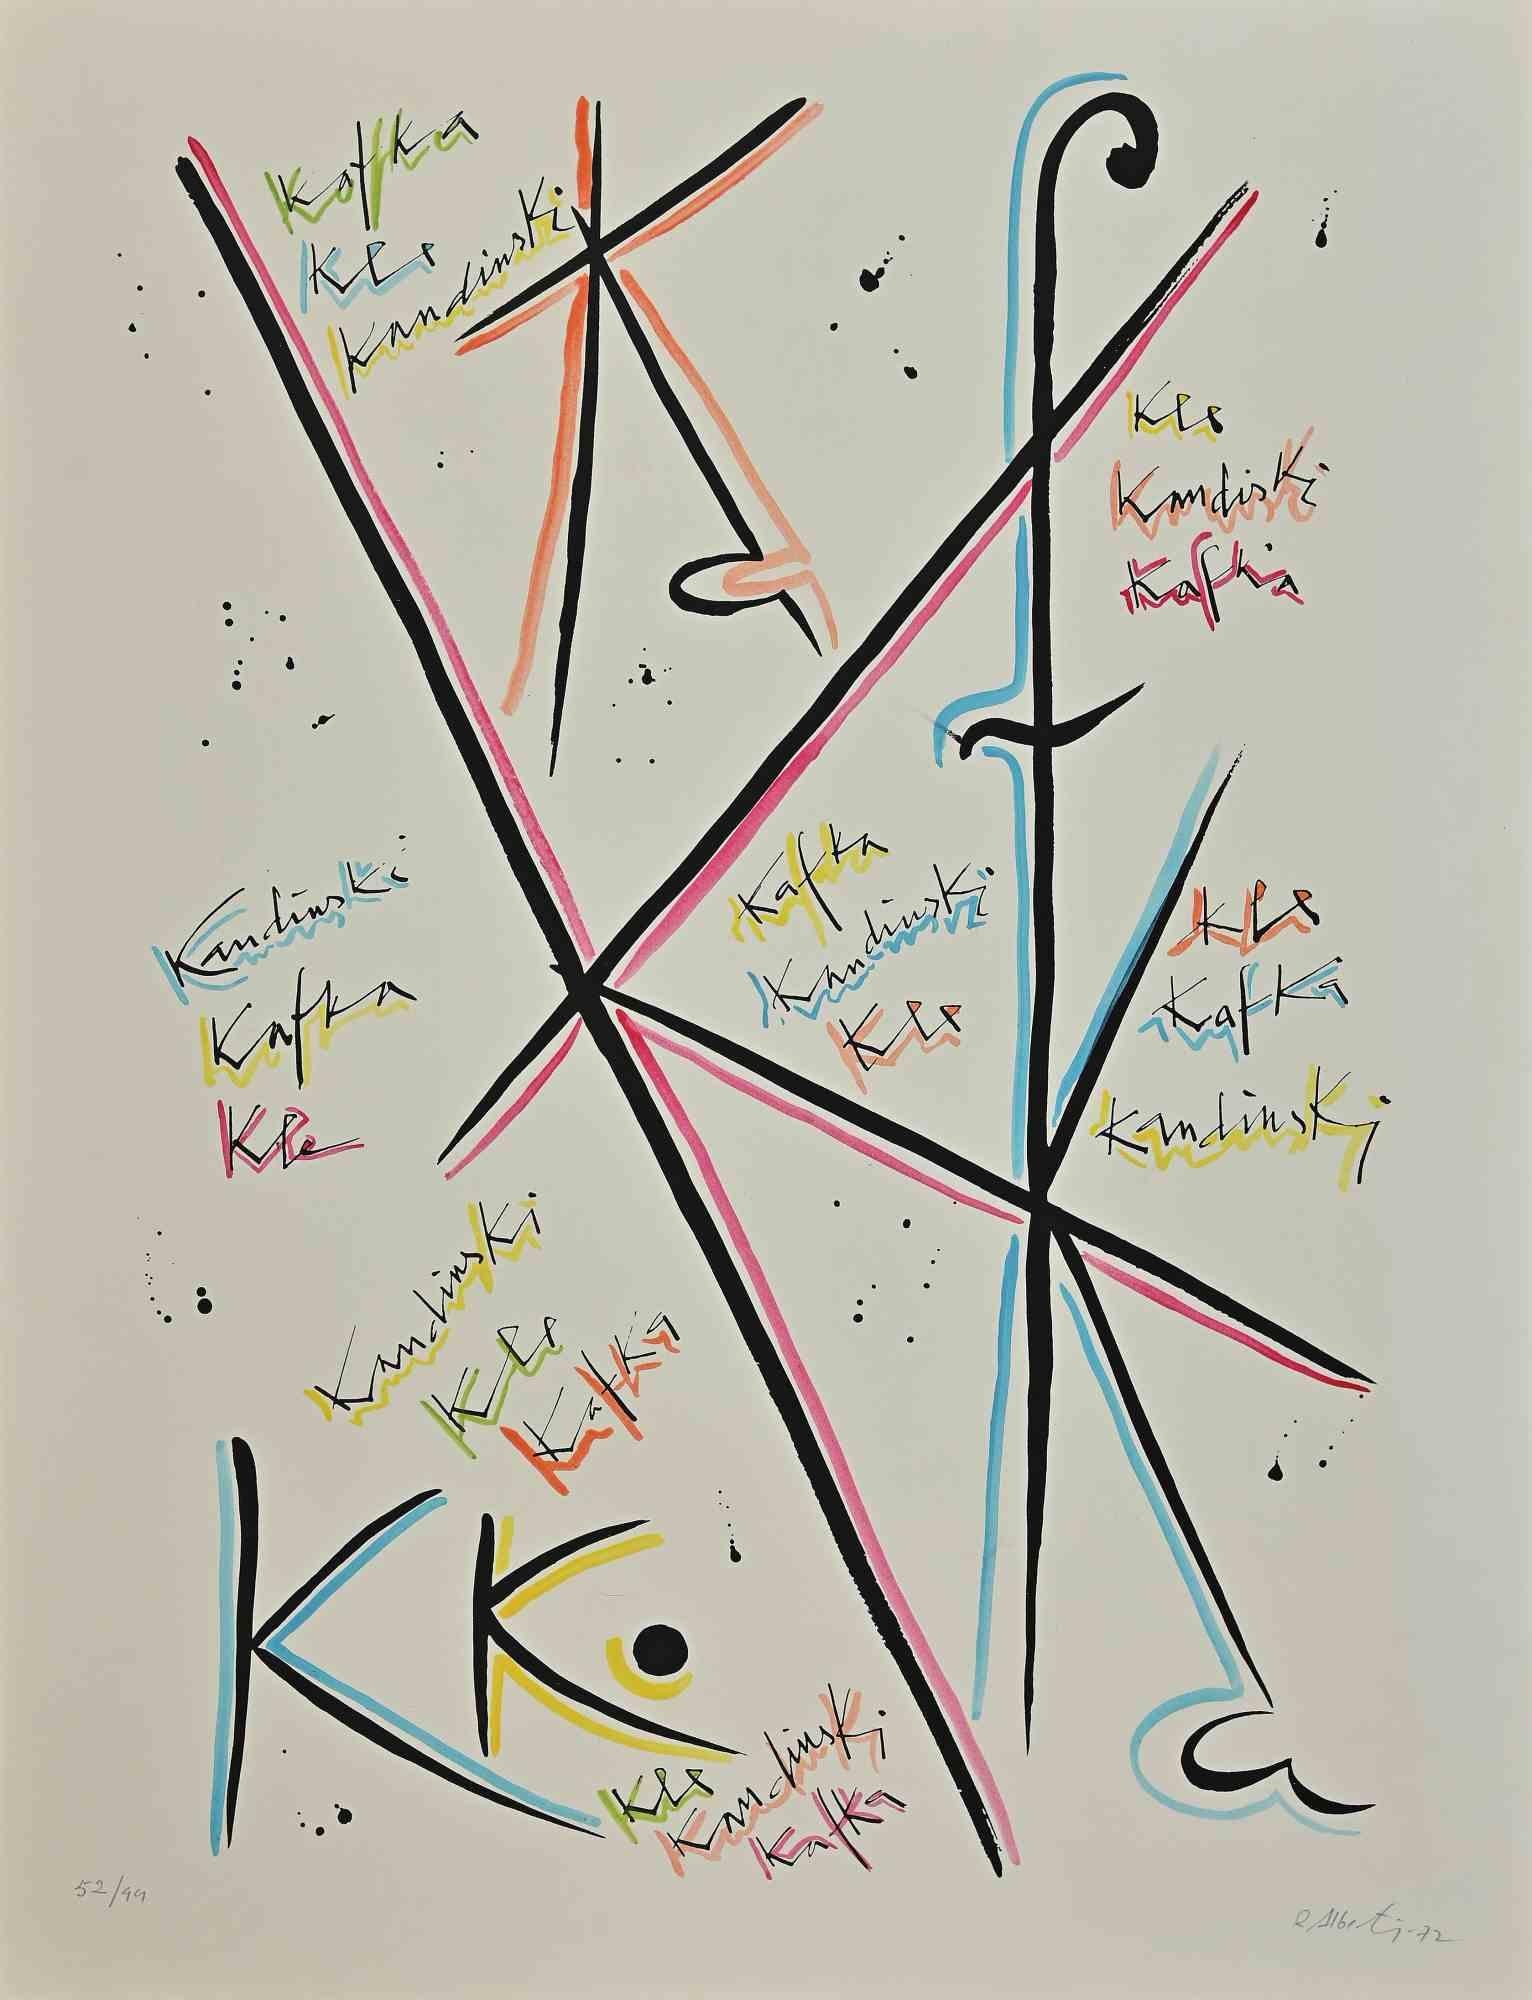 Letter K from the Alphabet series is a lithograph realized by Rafael Alberti in 1972.

Hand-signed on the lower right.

Numbered, edition 52/99.

The state of preservation is good.

The artwork represents the alphabet letter, with a poetical